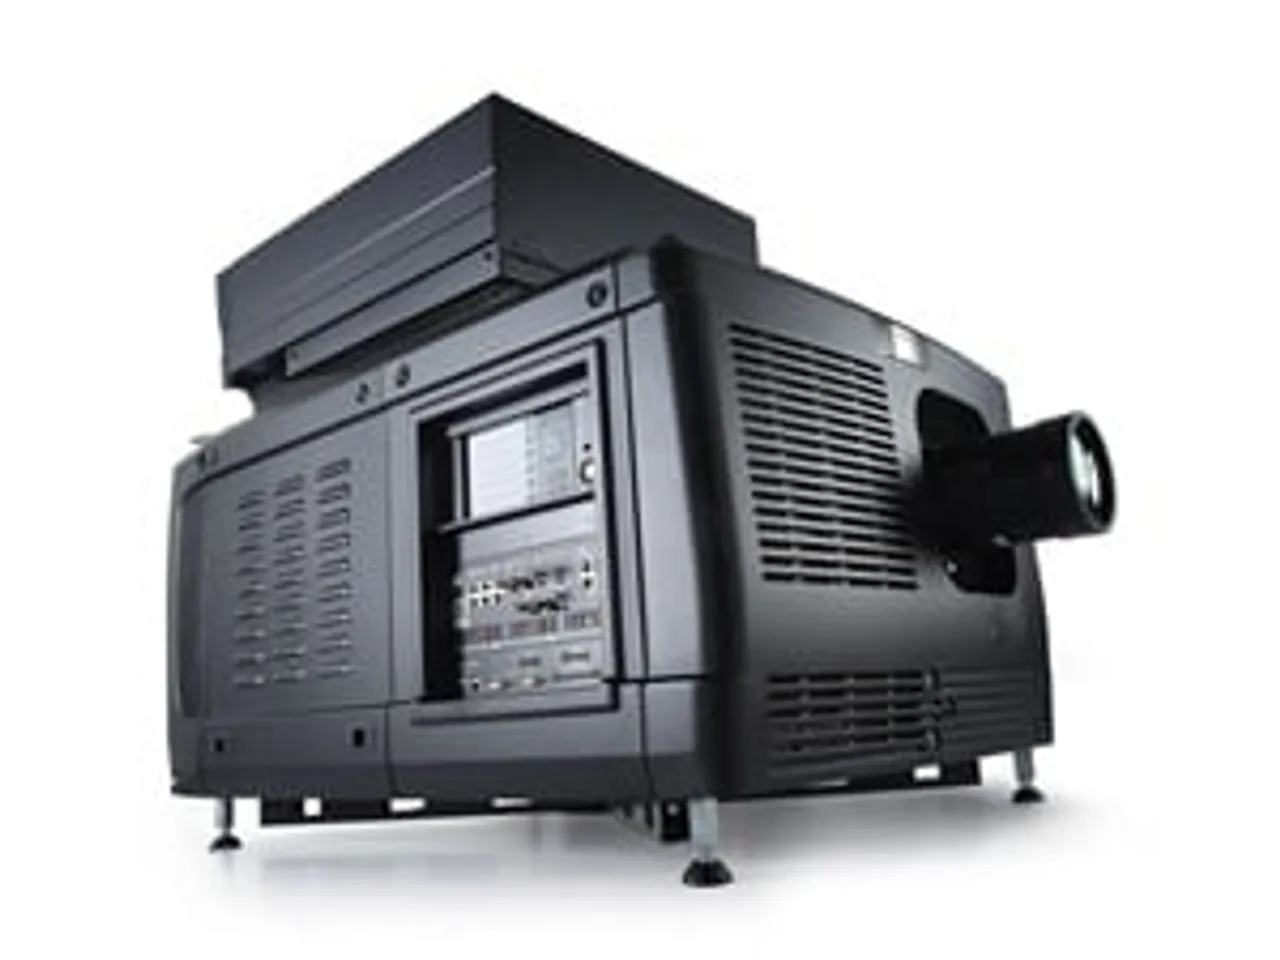 Barco Launches Smart Laser projectors allow cinemas to benefit from low TCO